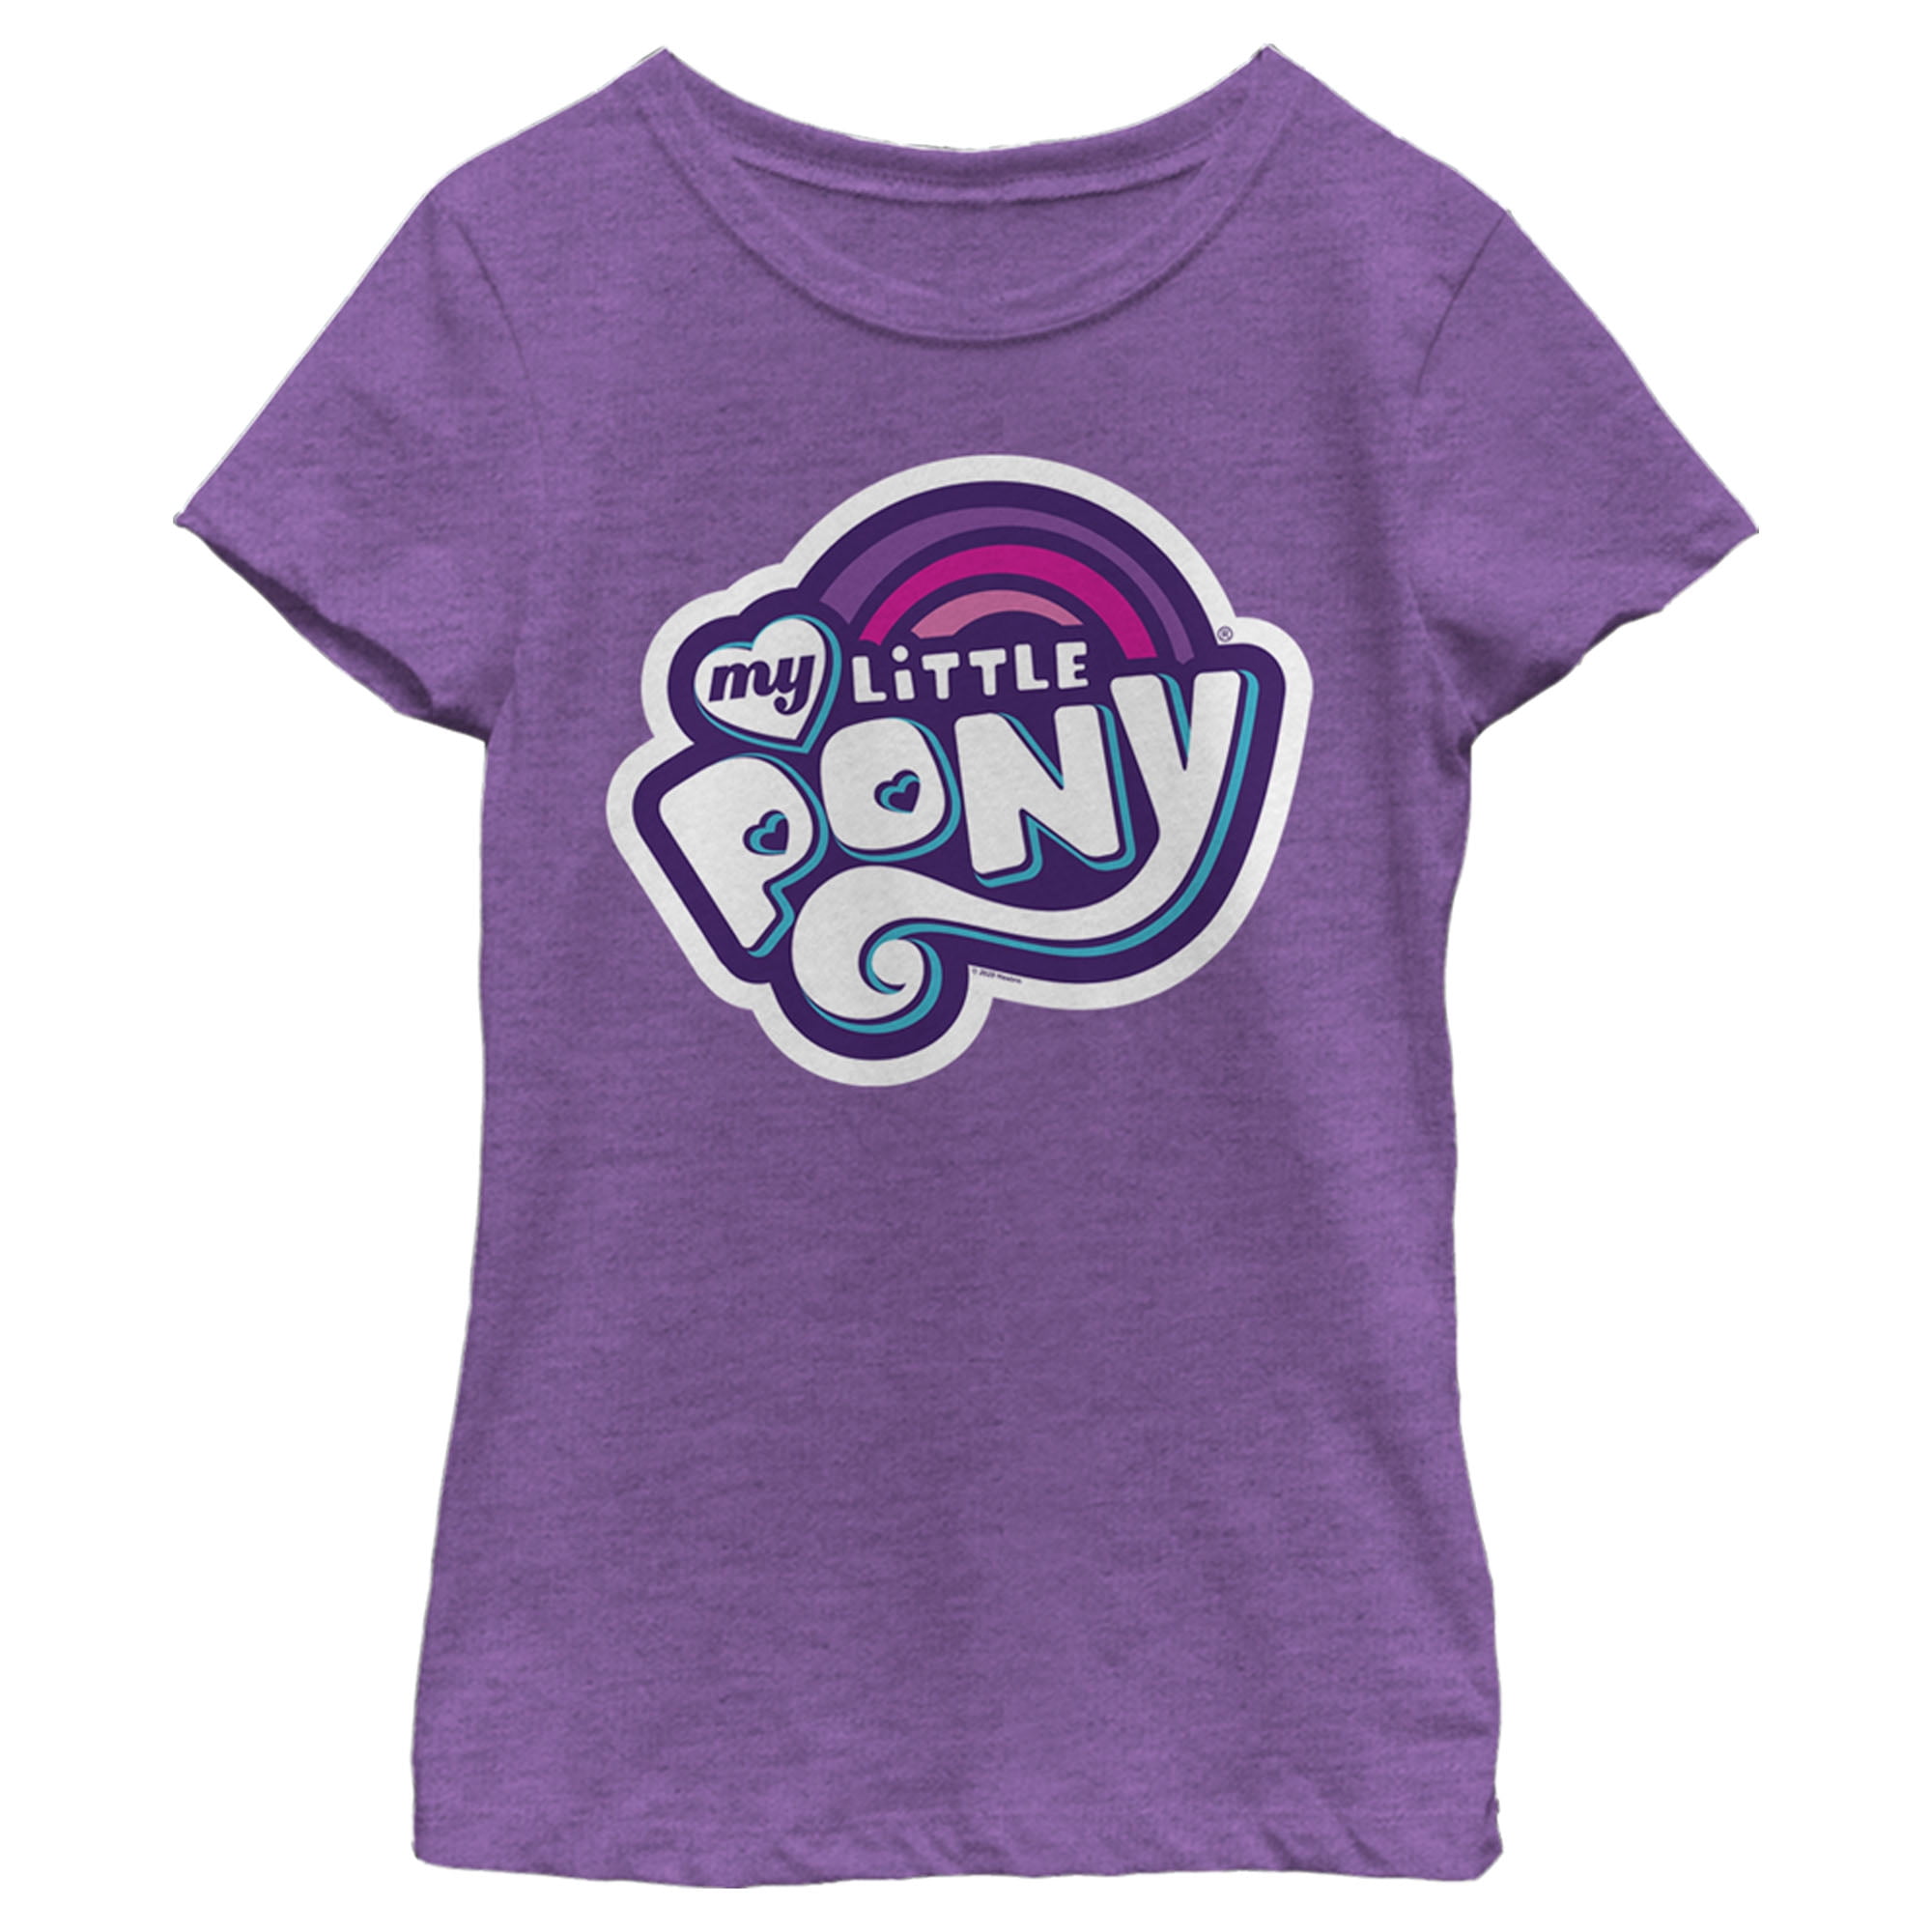 New Girls My Little Pony T Shirts 3 Designs Age 18 Months 11 Years 